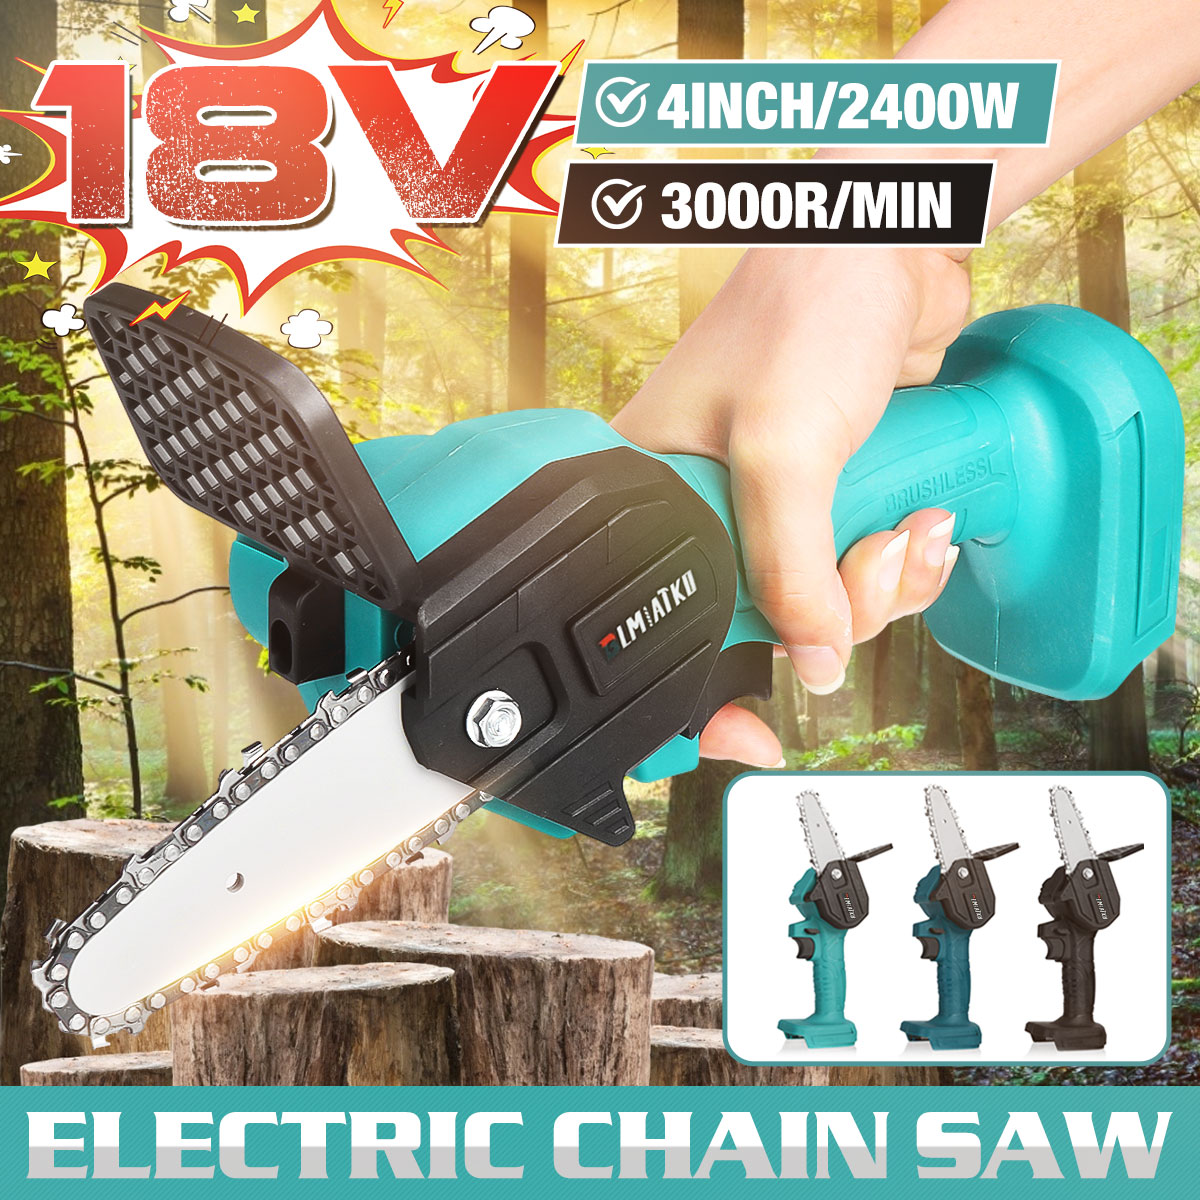 4Inch-2500W-Electric-Chain-Saw-Portable-Woodworking-Wood-Cutter-For-Makita-18V-Battery-1852917-1